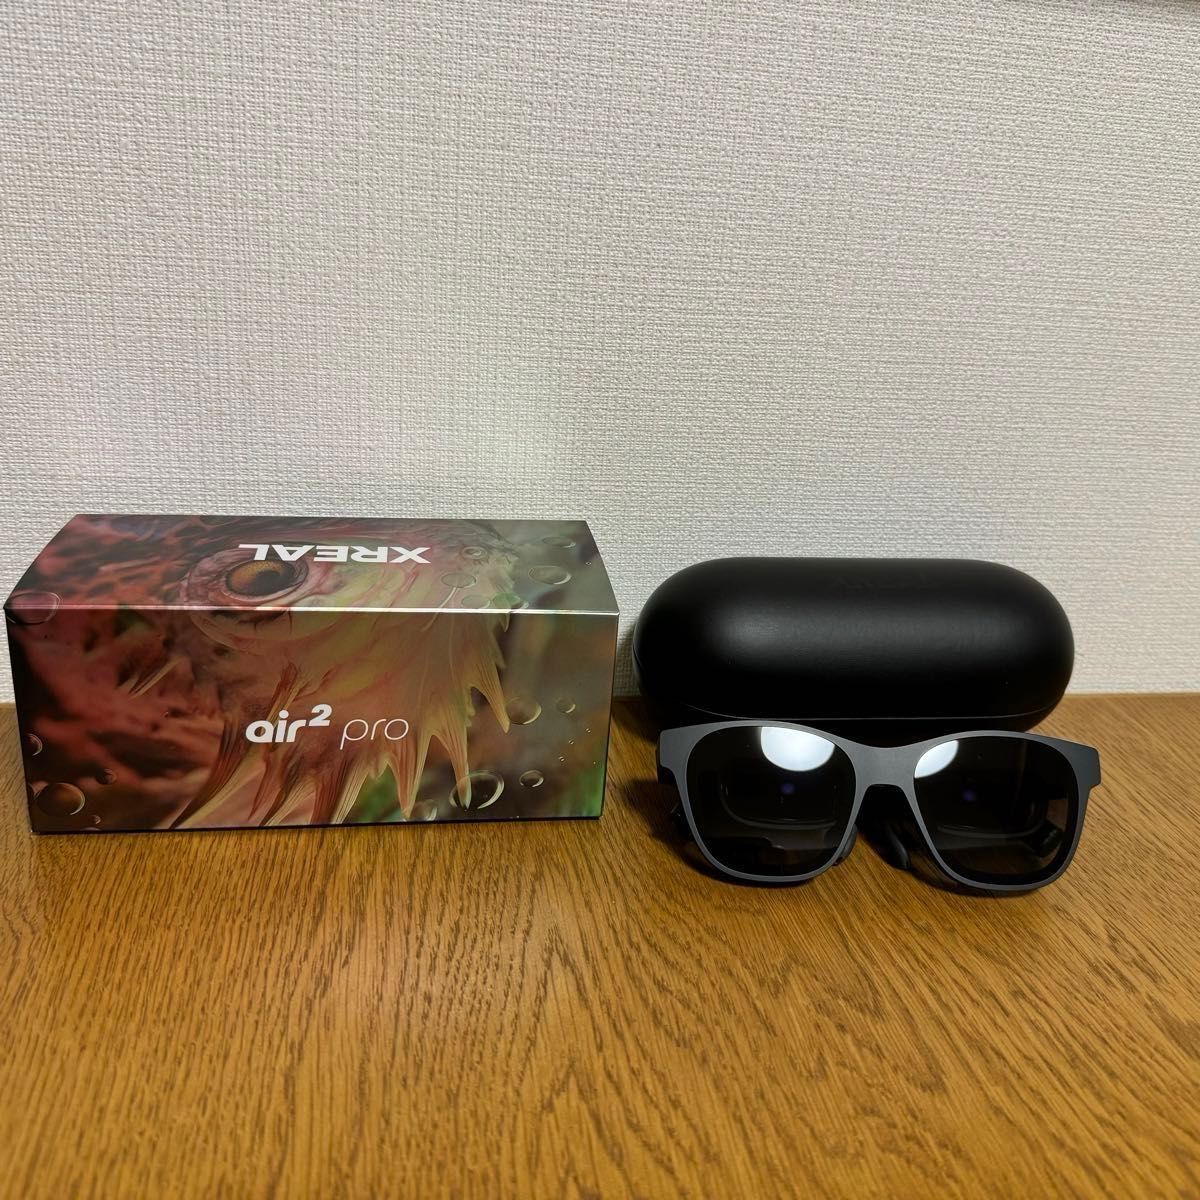 xreal air2 pro+xreal beam ARグラス Nreal